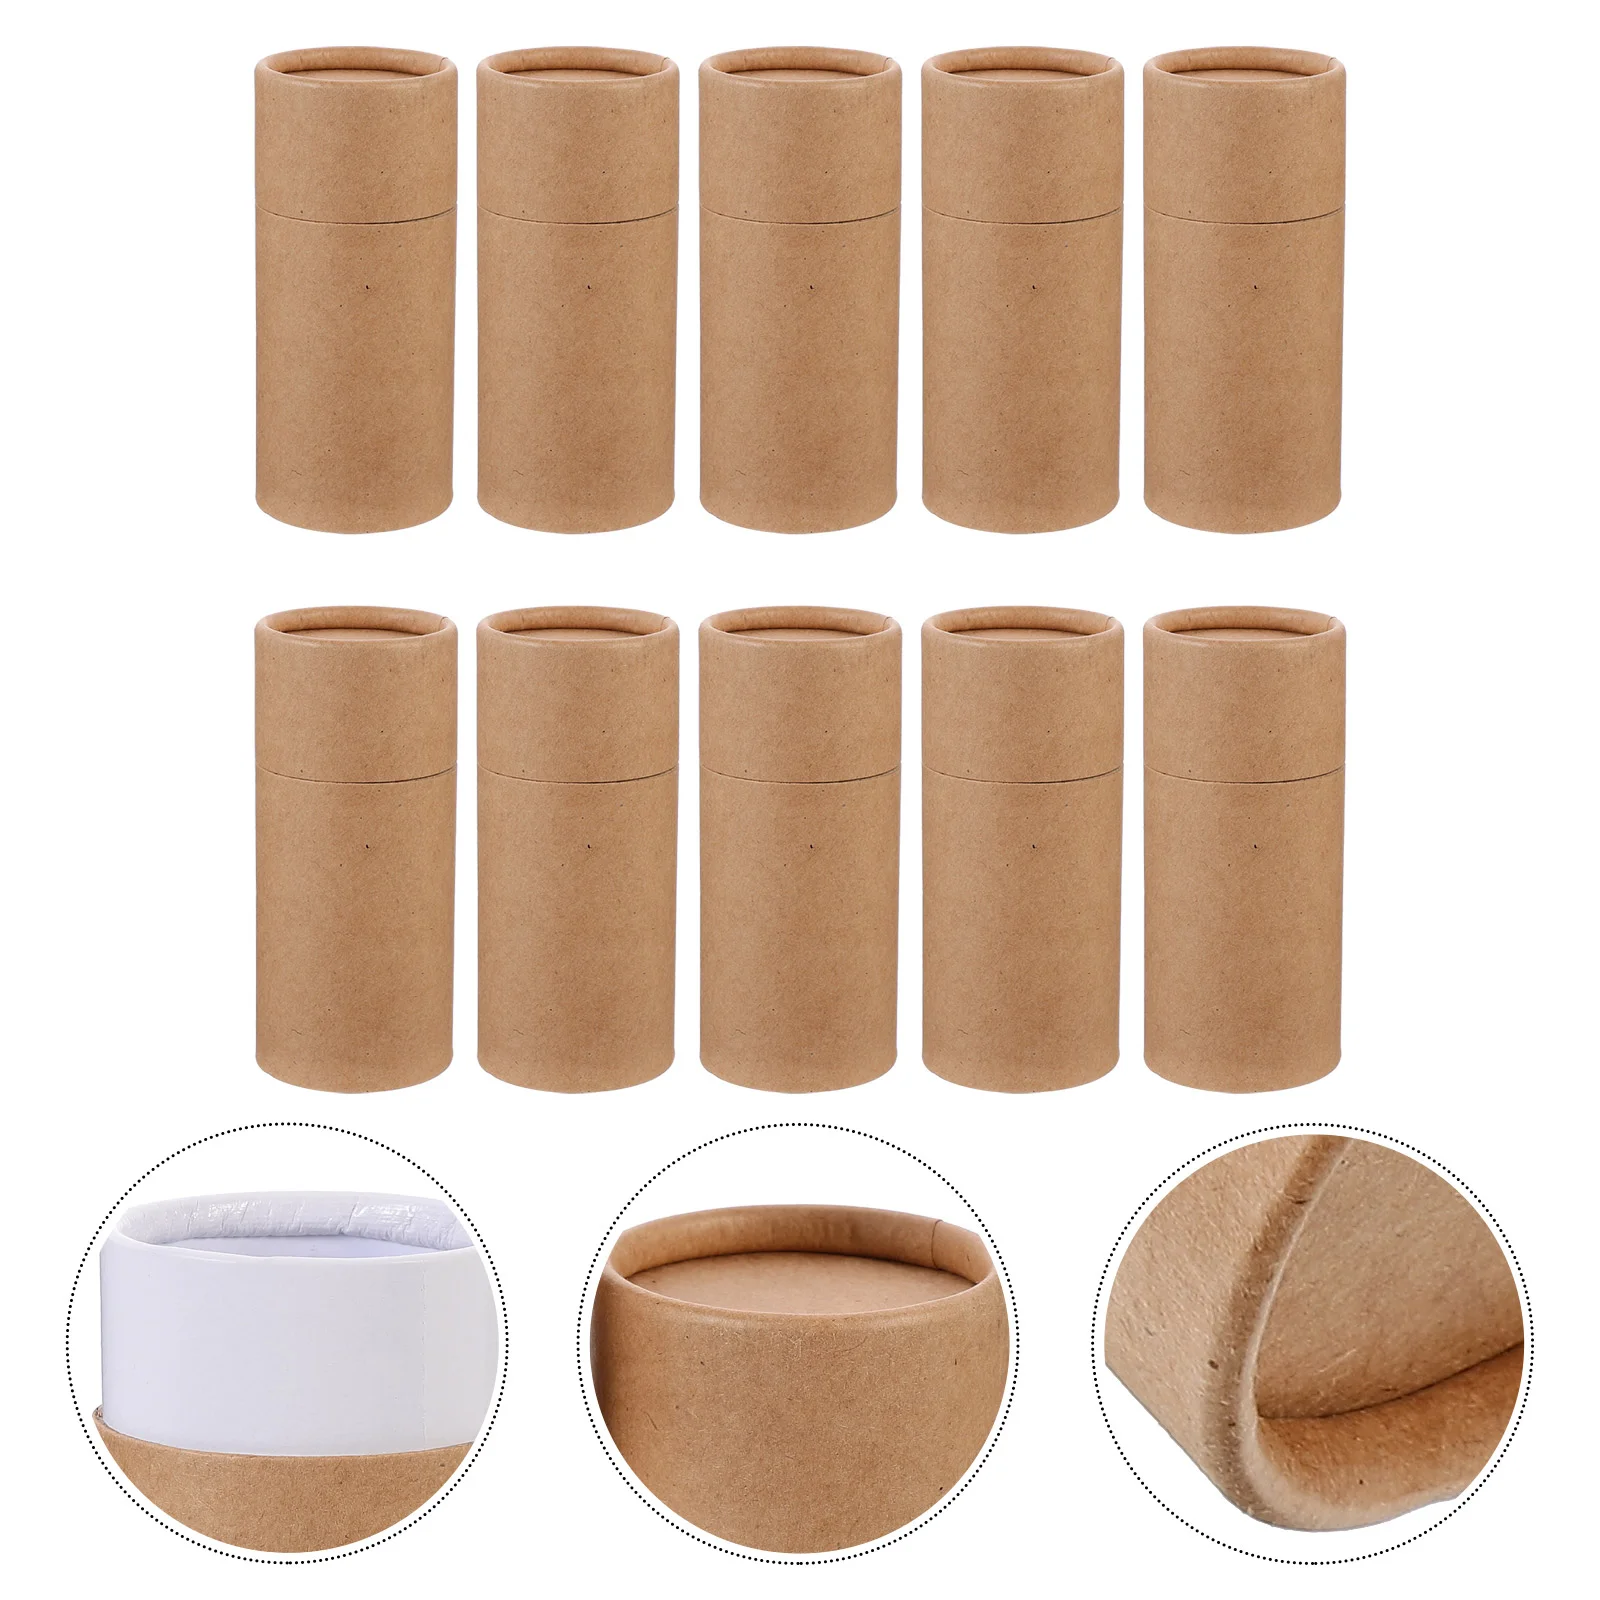 

10 Pcs Essential Oil Bottle Paper Tube Box Bulk Candles Gift Containers Practical Holder Storage Cans Face Mounting Child